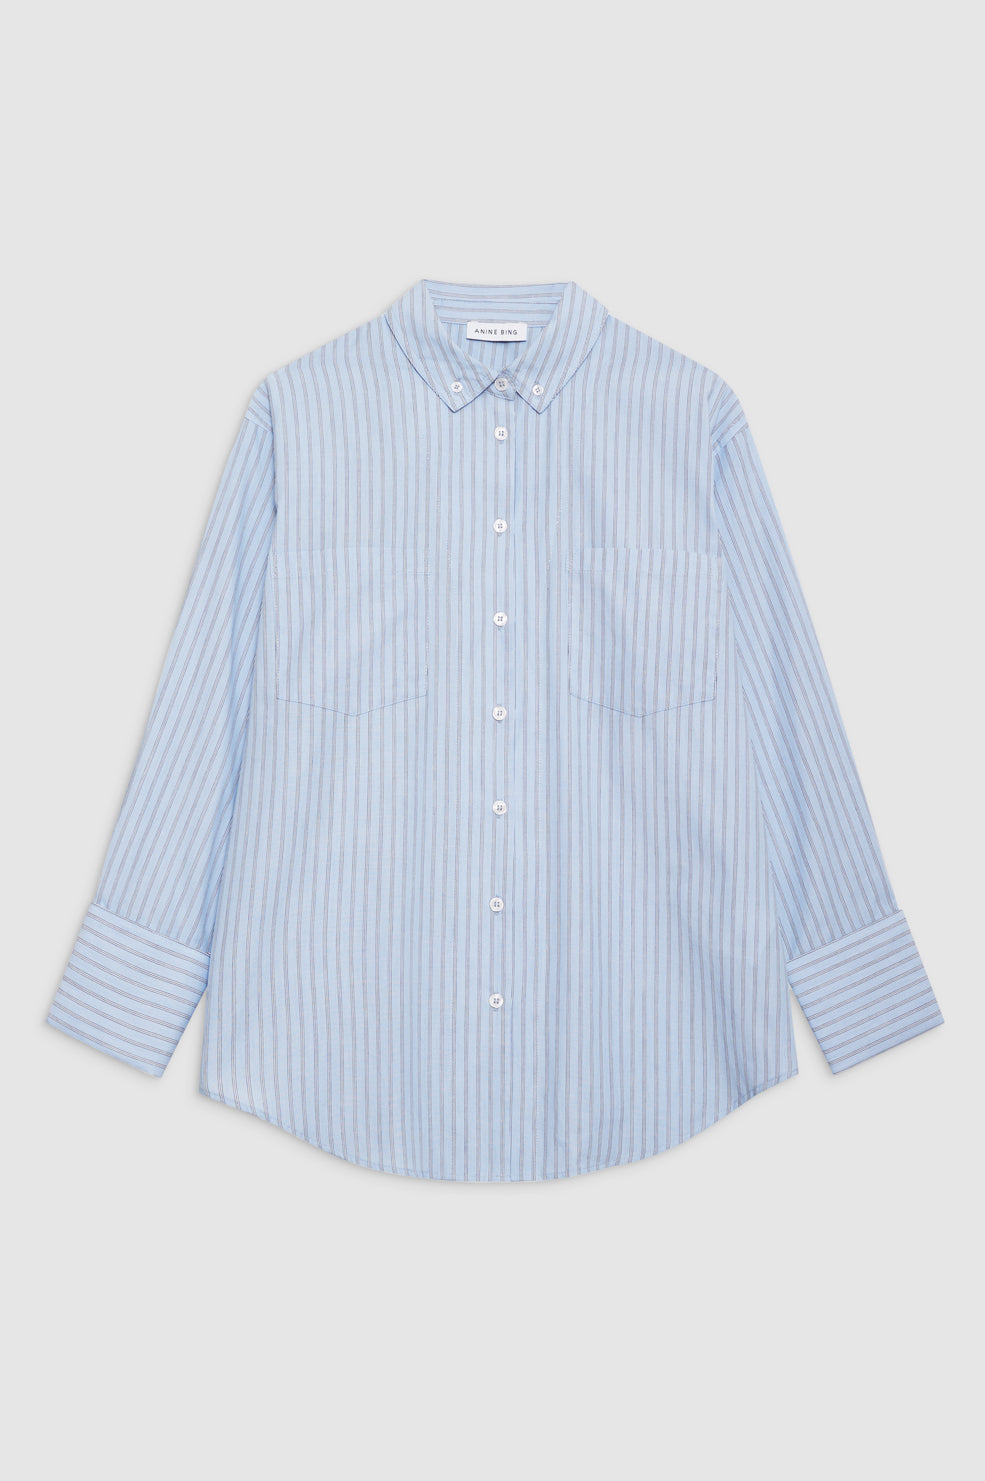 ANINE BING Catherine Shirt - Blue And White Stripe - Front View